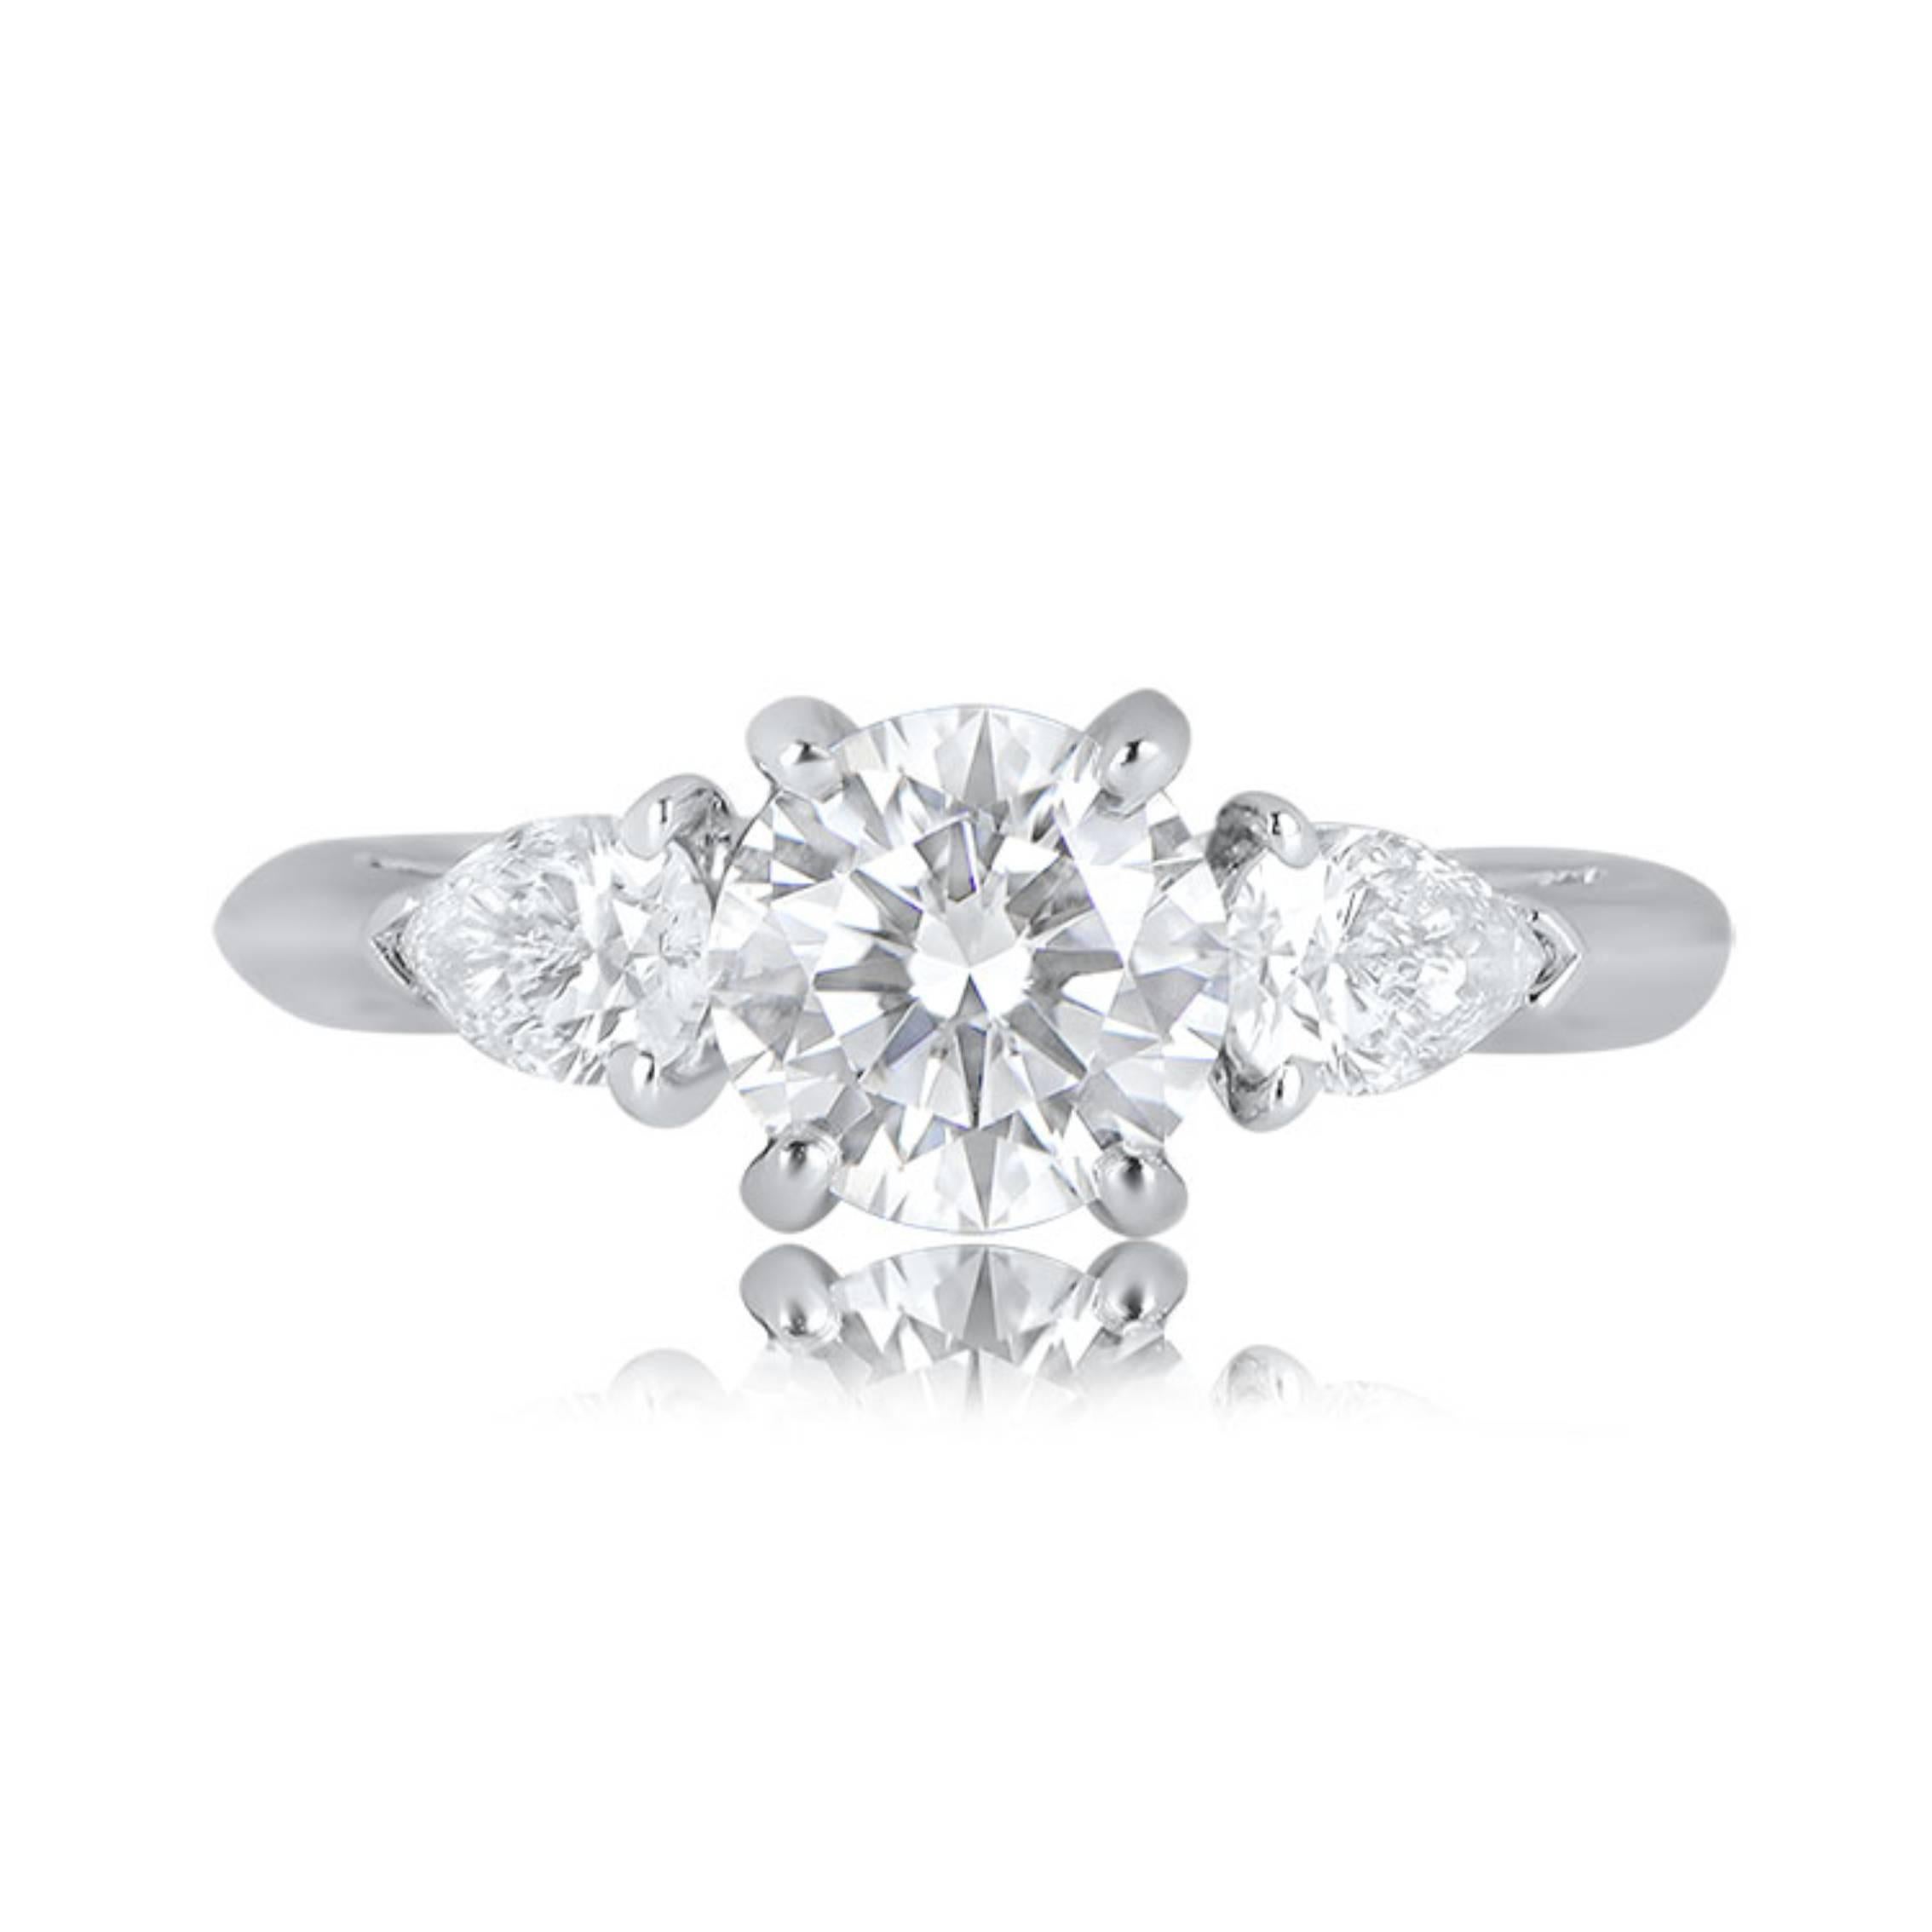 A captivating Tiffany engagement ring showcasing a brilliant 1.04-carat diamond with G color and VS1 clarity. Complementing the center stone are two pear-shaped diamonds, totaling 0.47 carats, also in G color and VS1 clarity. Crafted in platinum,